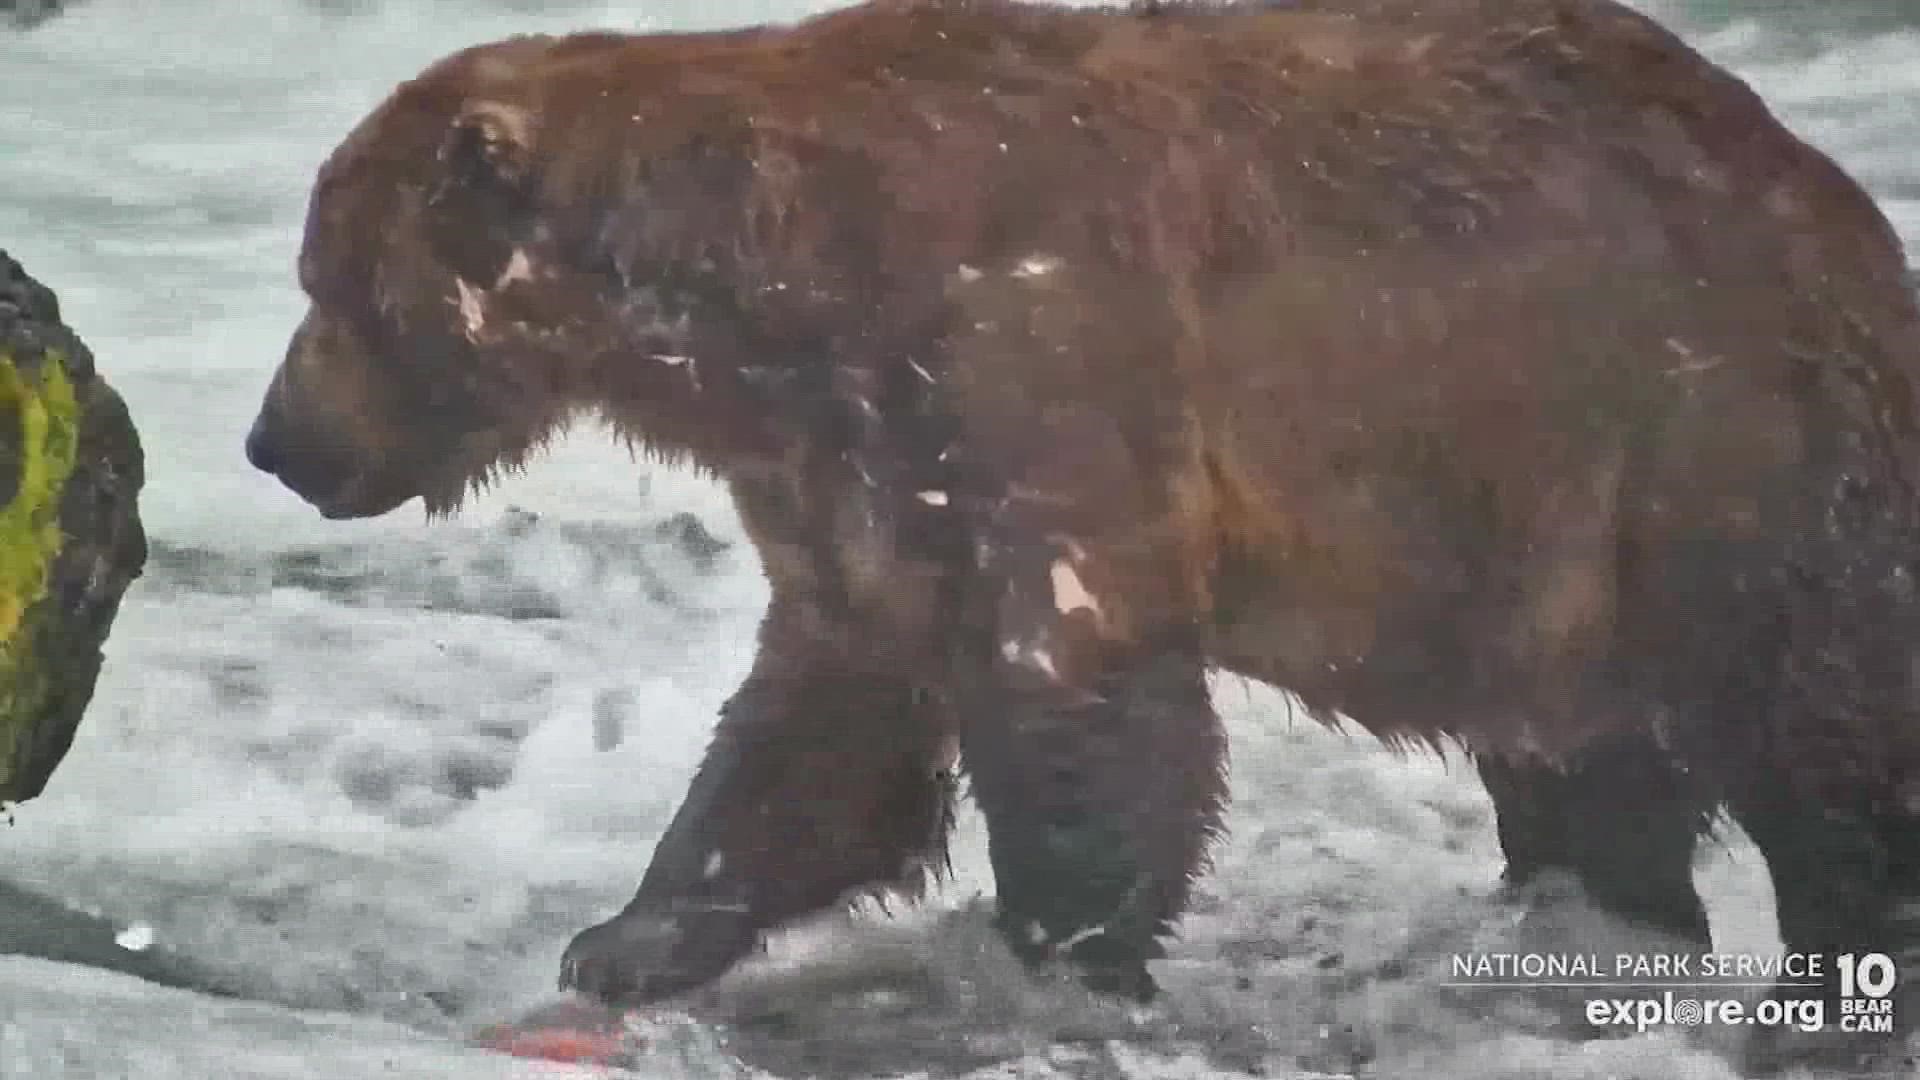 12 of the biggest bears at Katmai National Park are going head to head in public votes all week long.